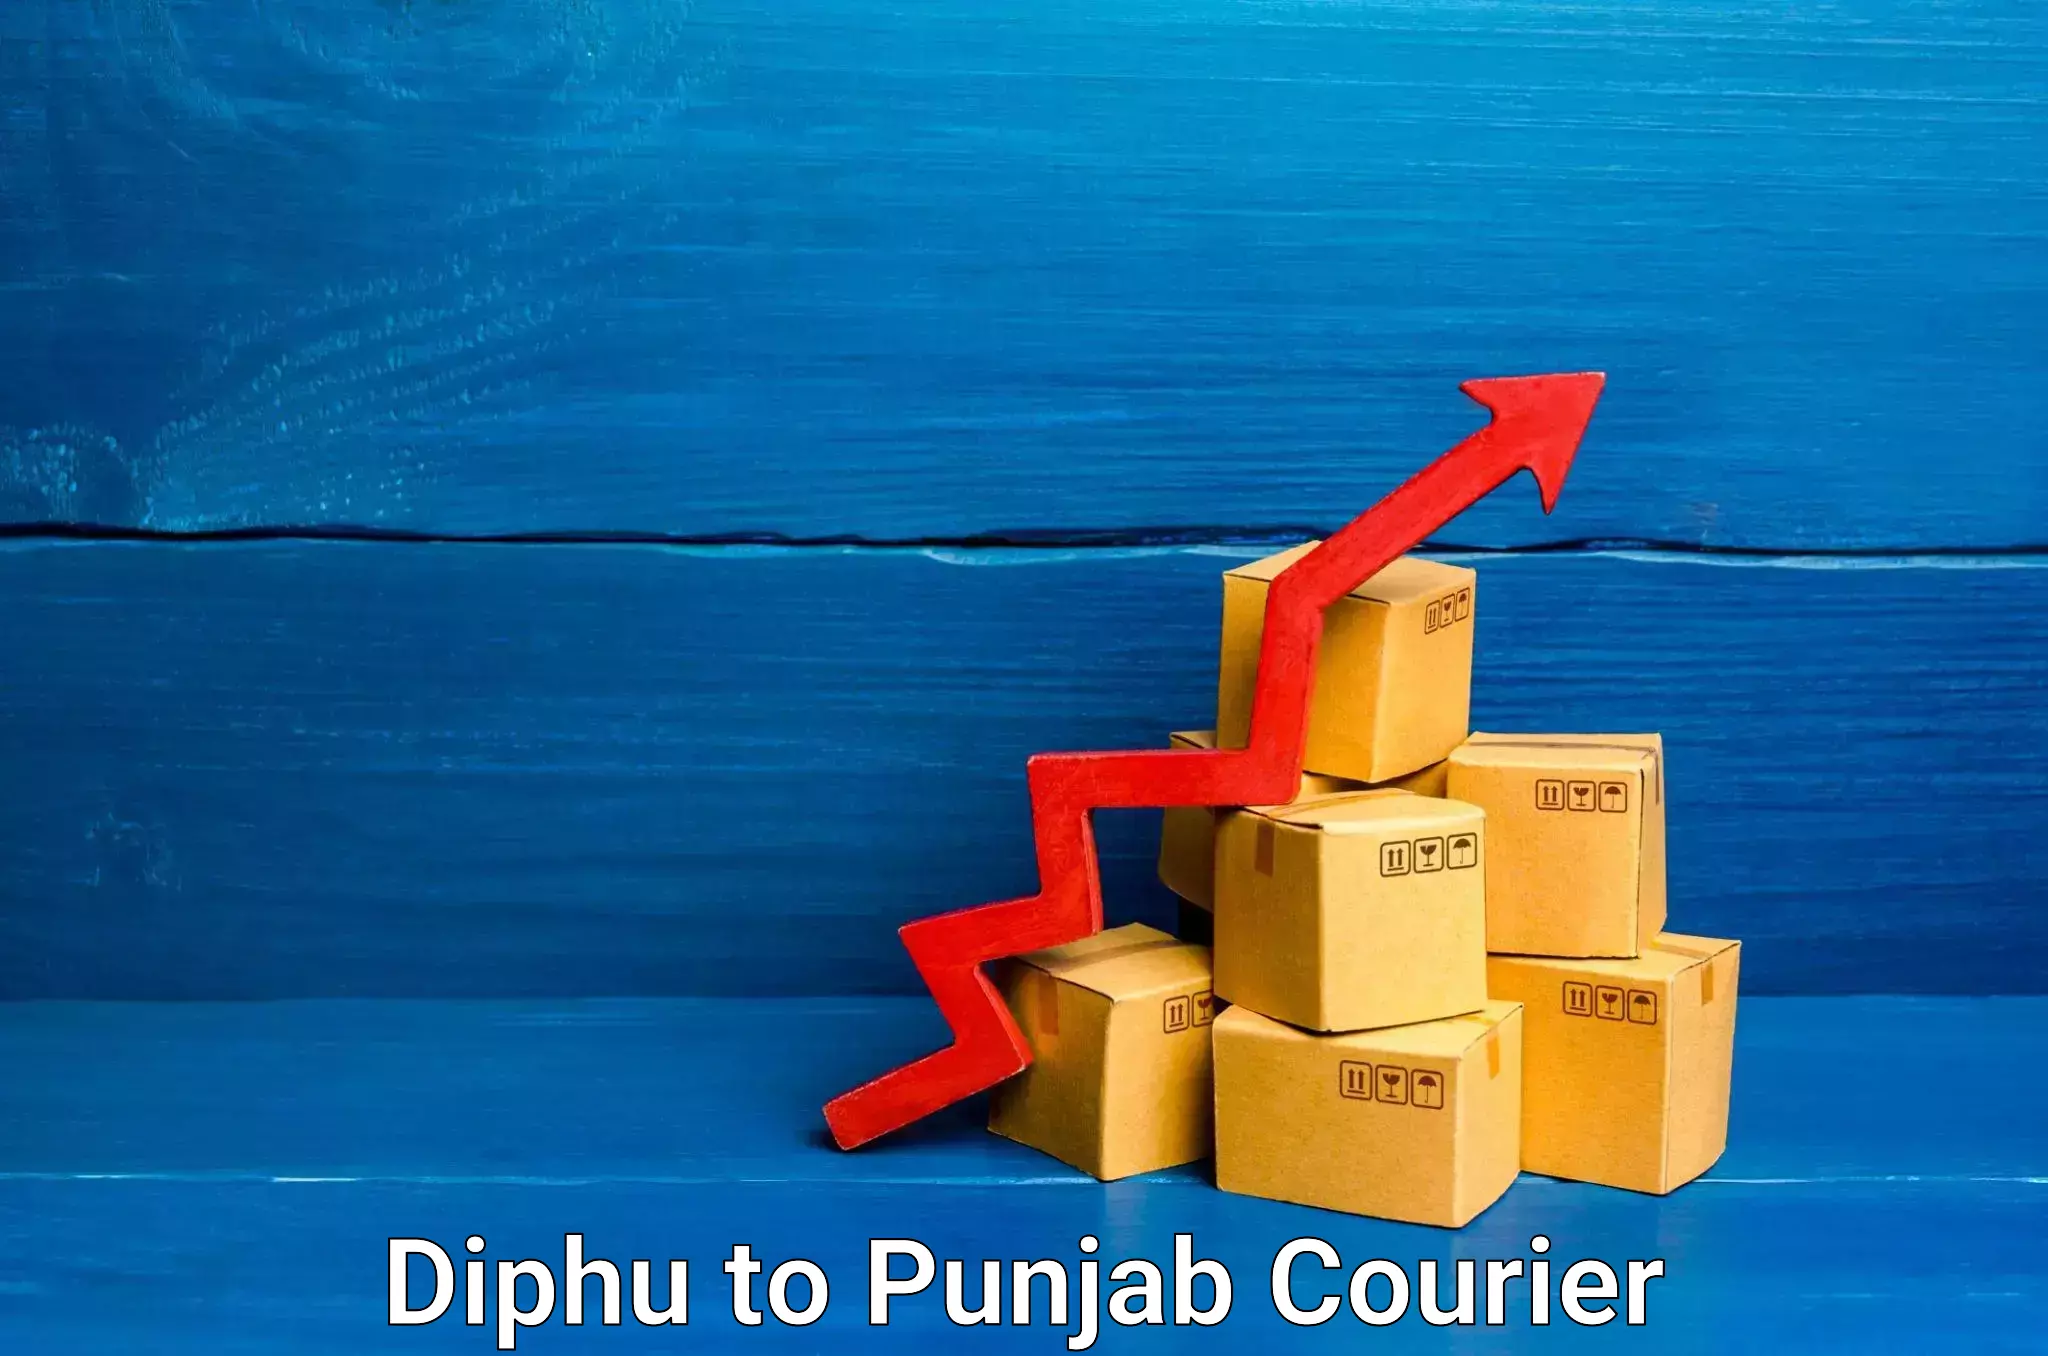 Medical delivery services Diphu to Punjab